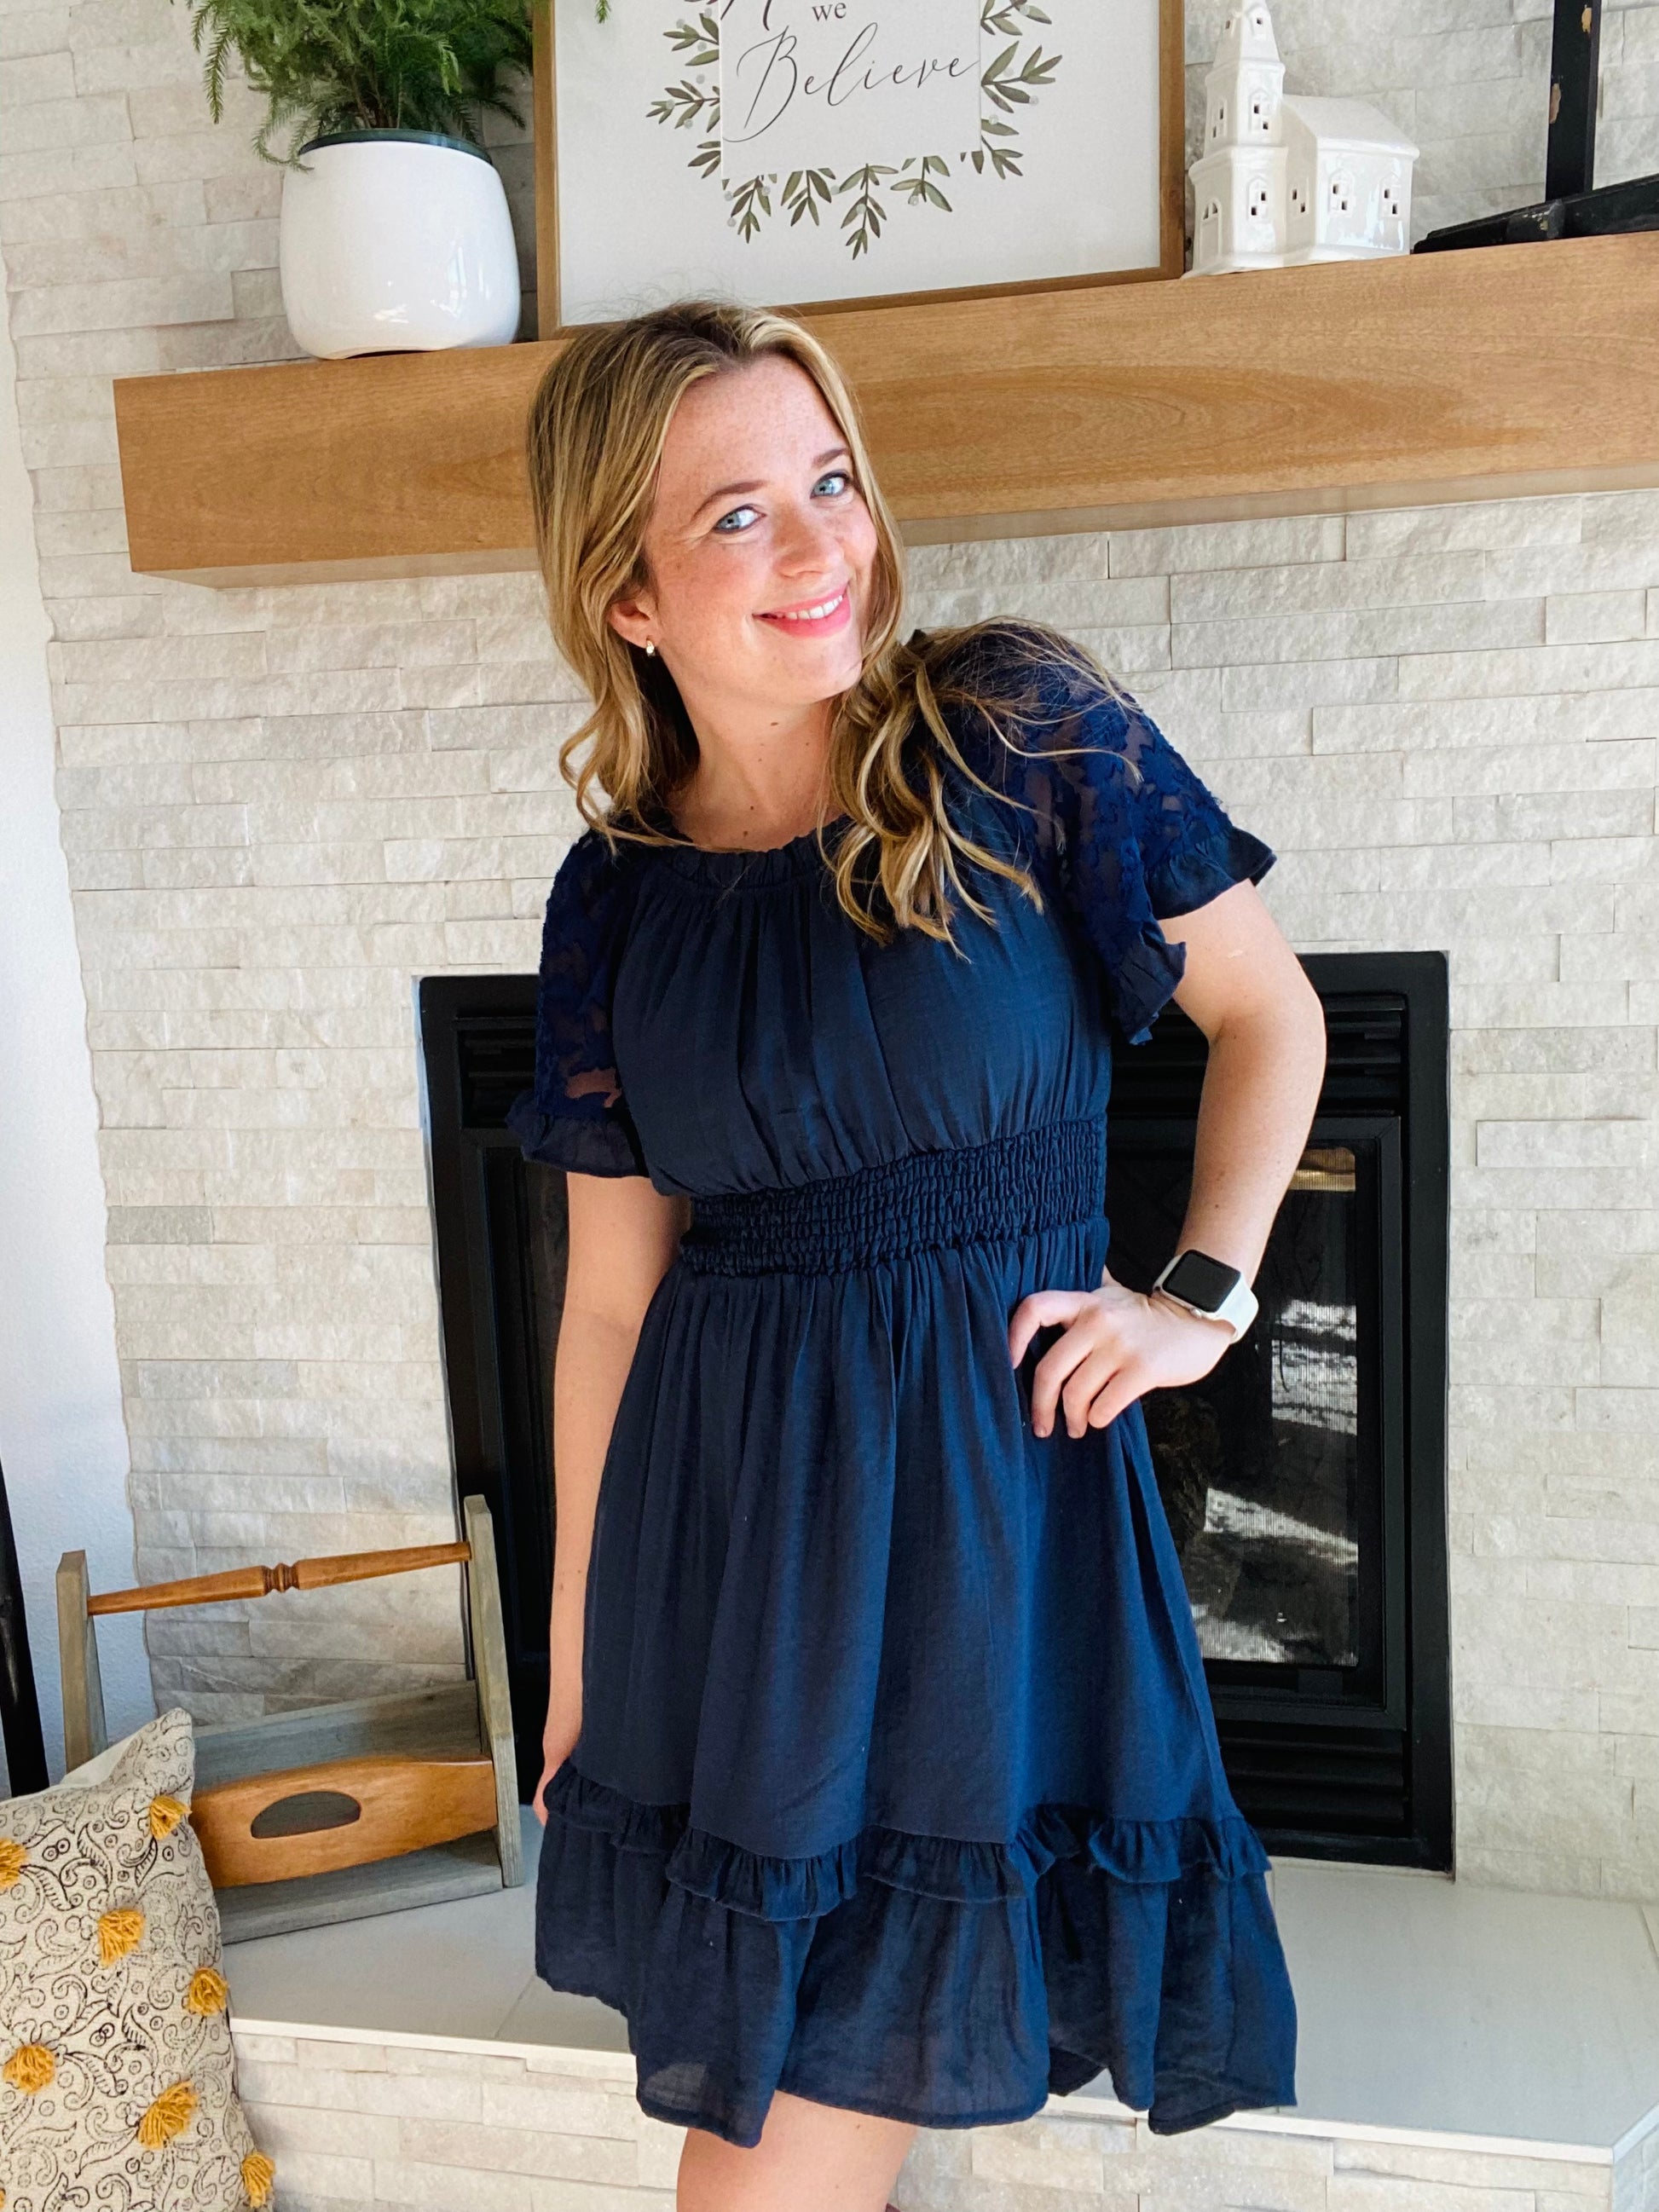 This Nacy Lace Sleeve Smocked Dress is perfect for any occasion. Crafted from high-quality fabric, this country chic style dress features a cinched smocking waistline and delicate lace sleeve detail to make you look and feel your best. Ideal for the office or a summer barn wedding.